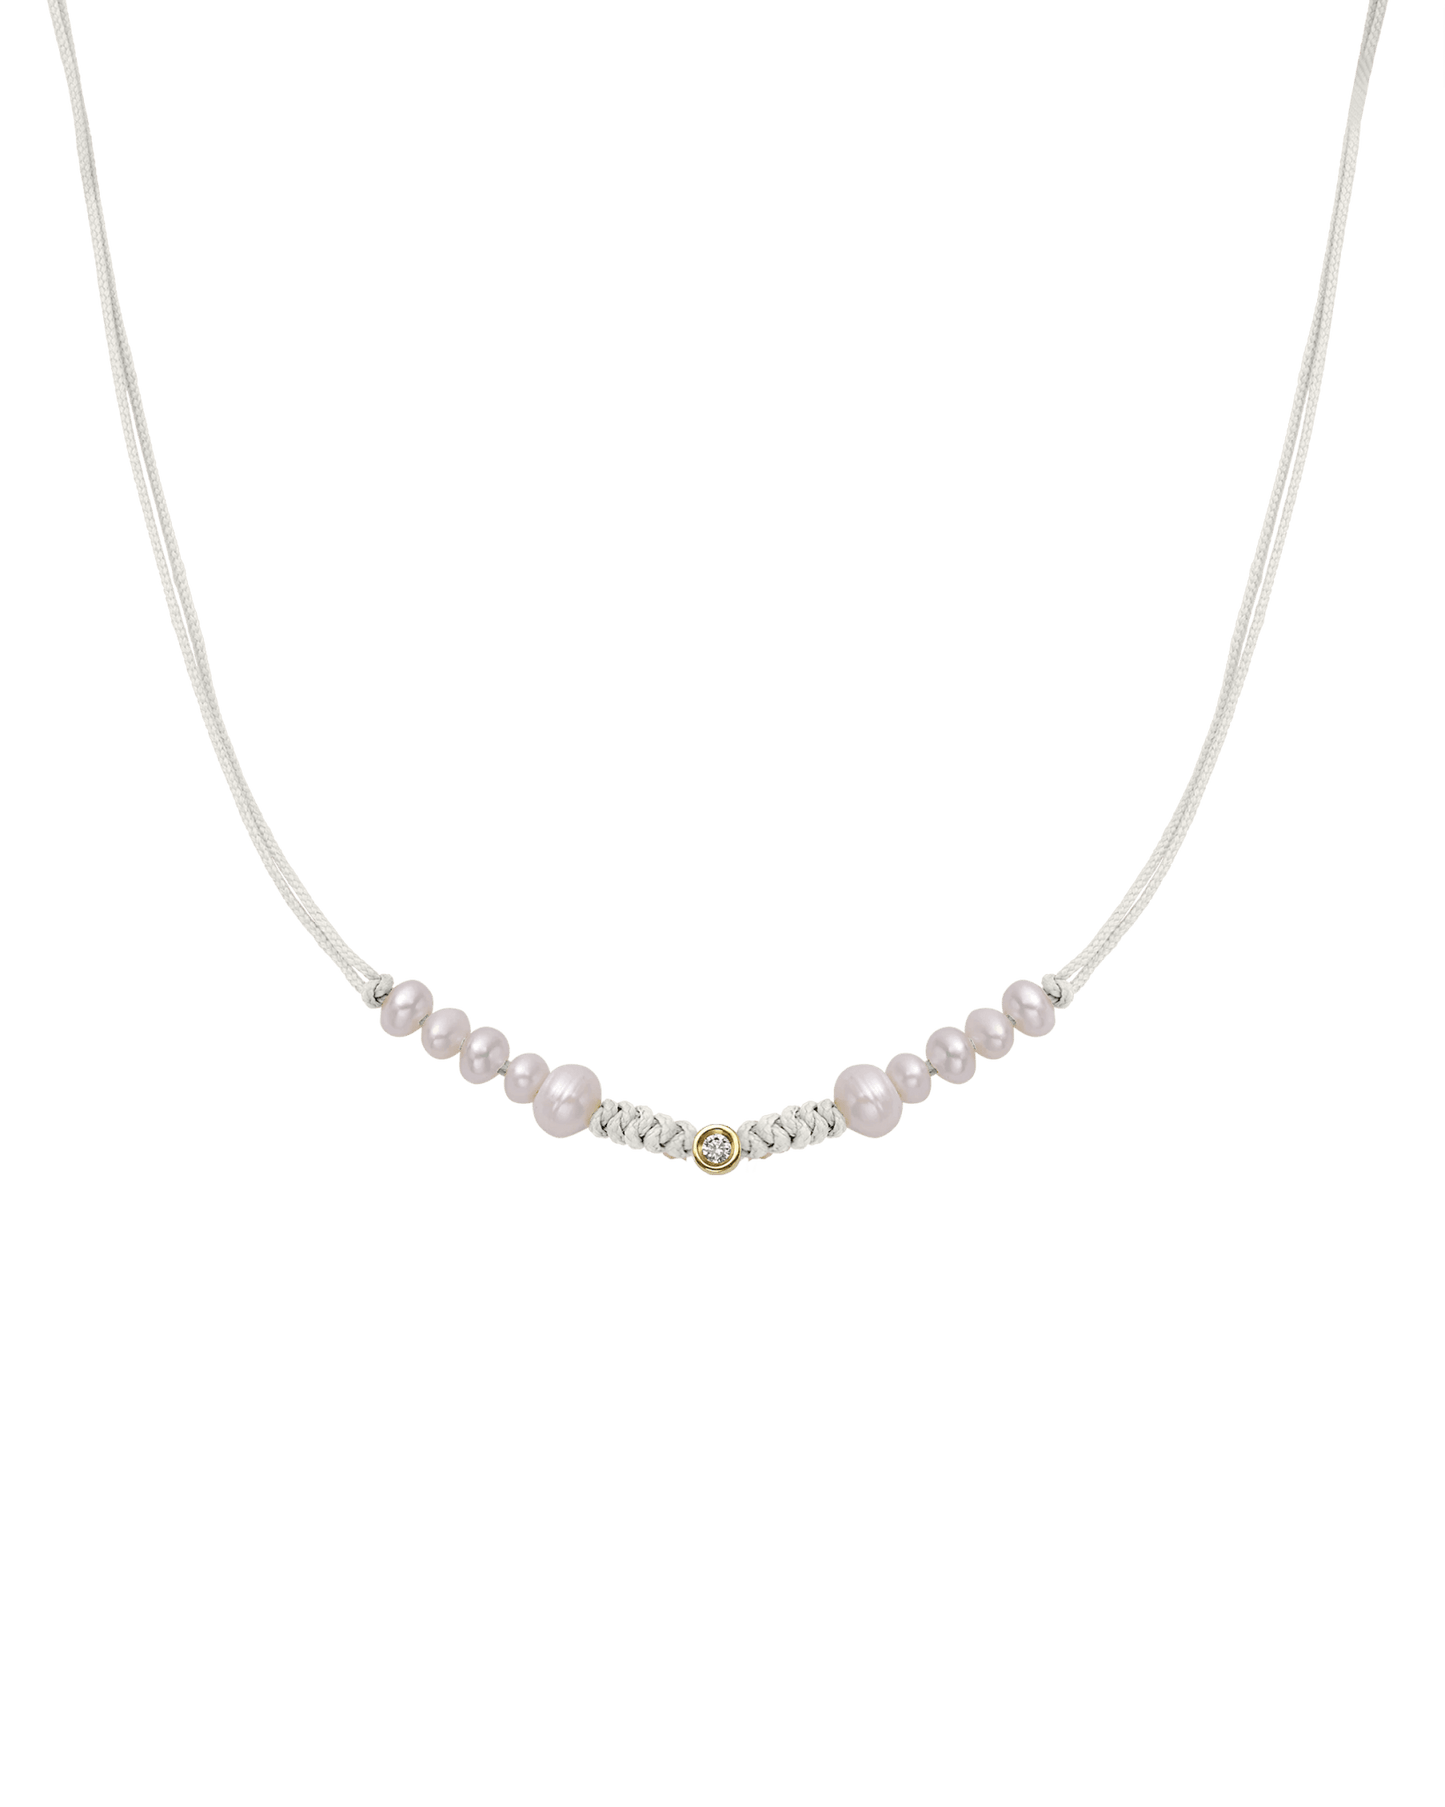 Ten Natural Pearl String of Love Necklace - 14K Yellow Gold Necklaces 14K Solid Gold Pearl Small: 0.03ct 